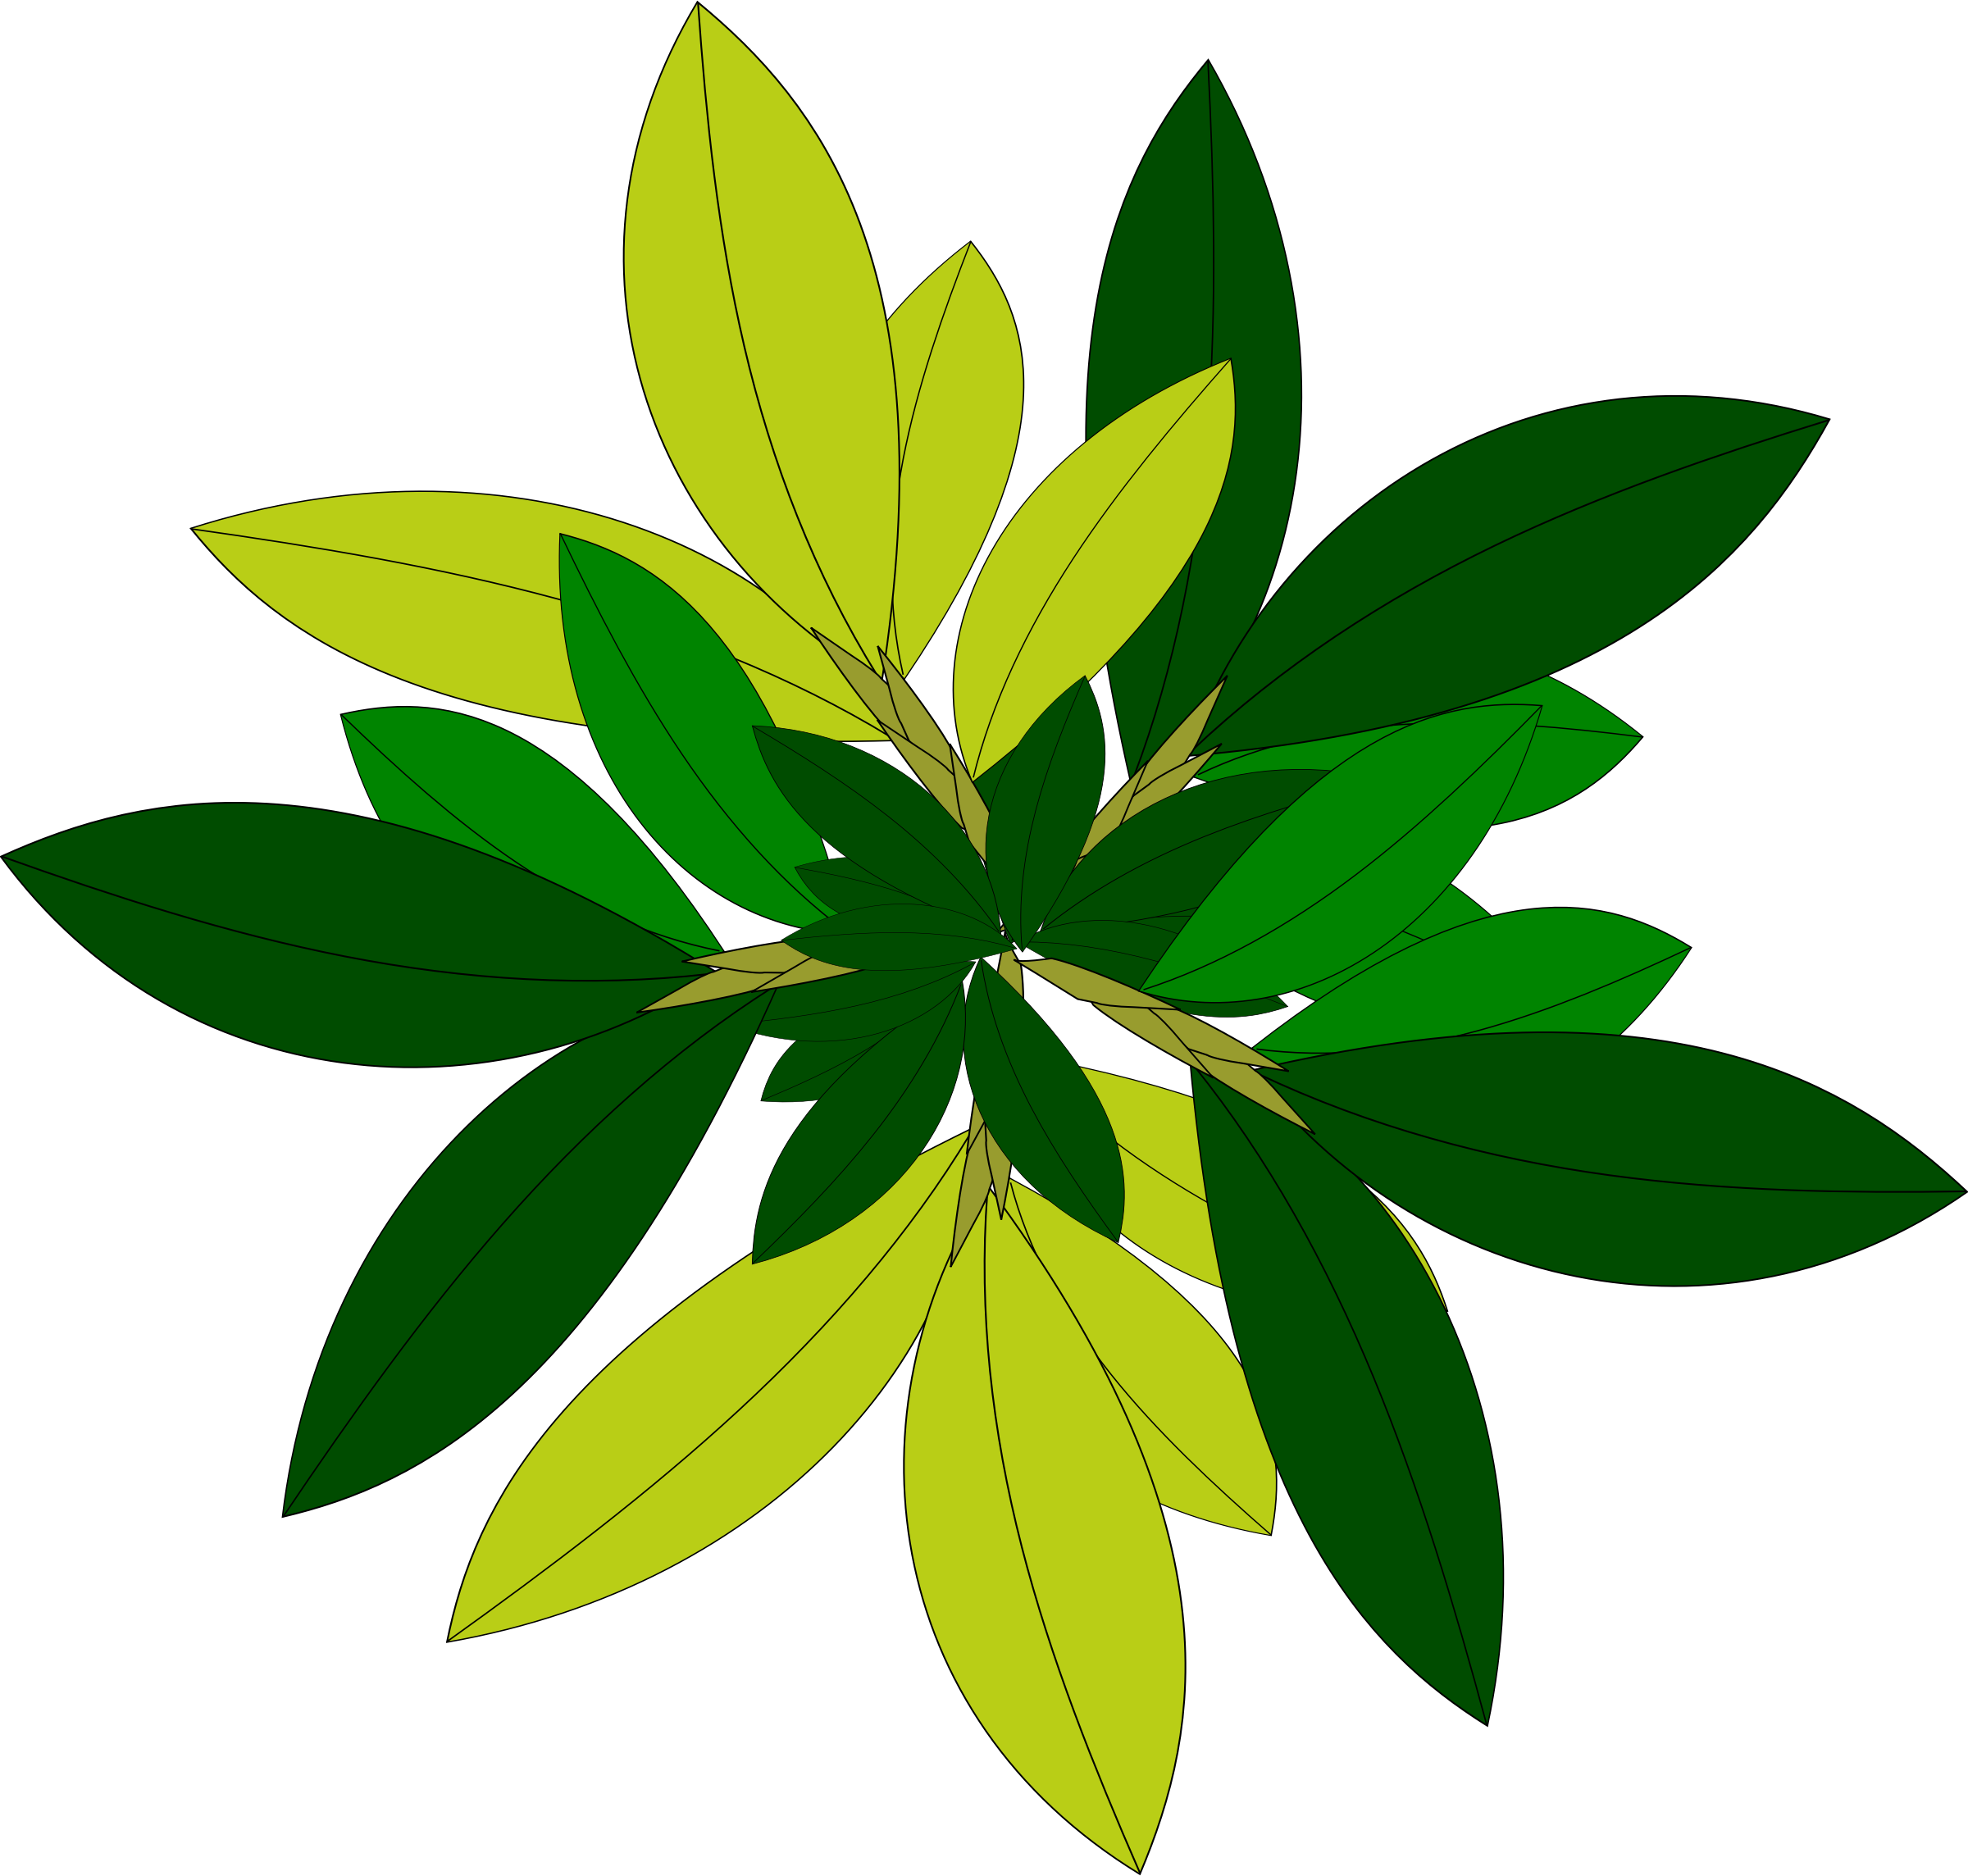 Tree-08 - Plant Top View Vector Png (2400x2288)